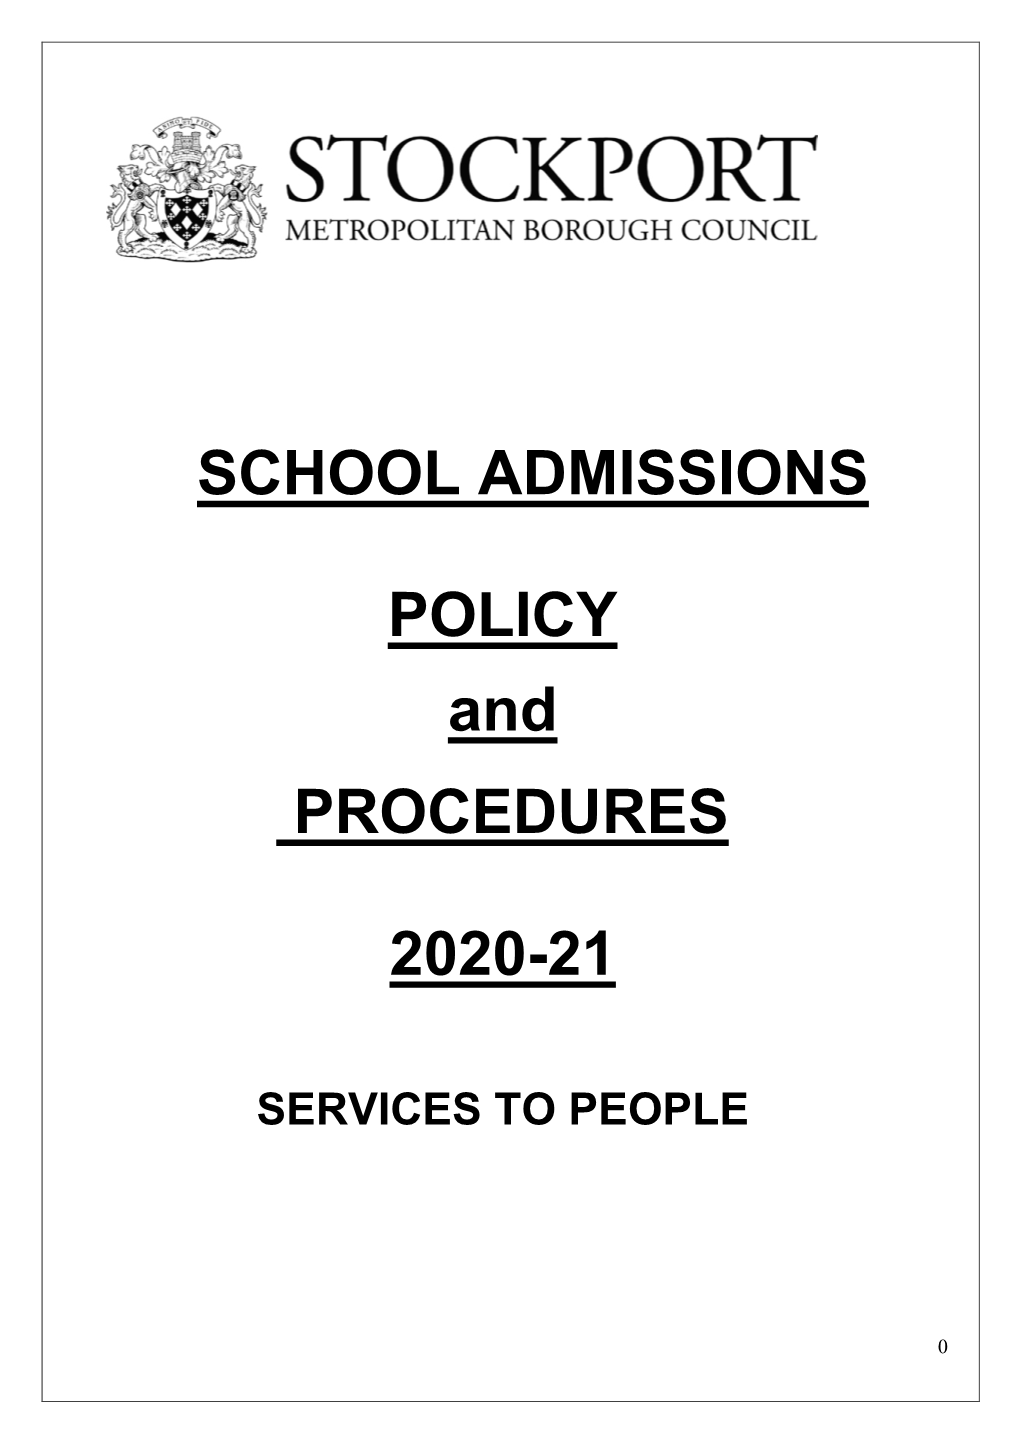 SCHOOL ADMISSIONS POLICY and PROCEDURES 2020-21